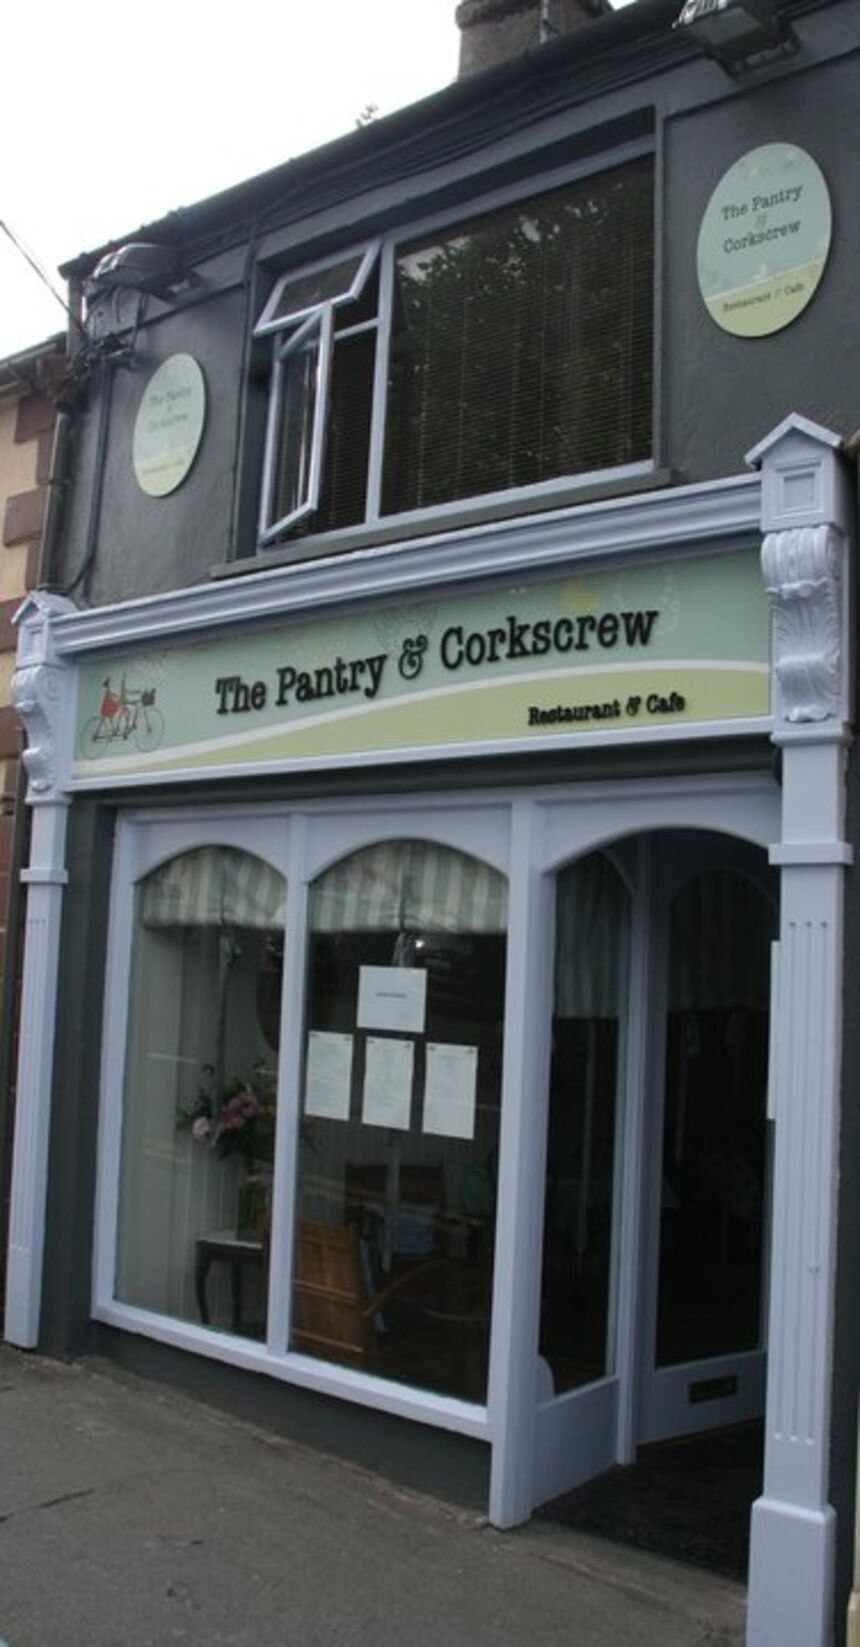 The Pantry and Corkscrew